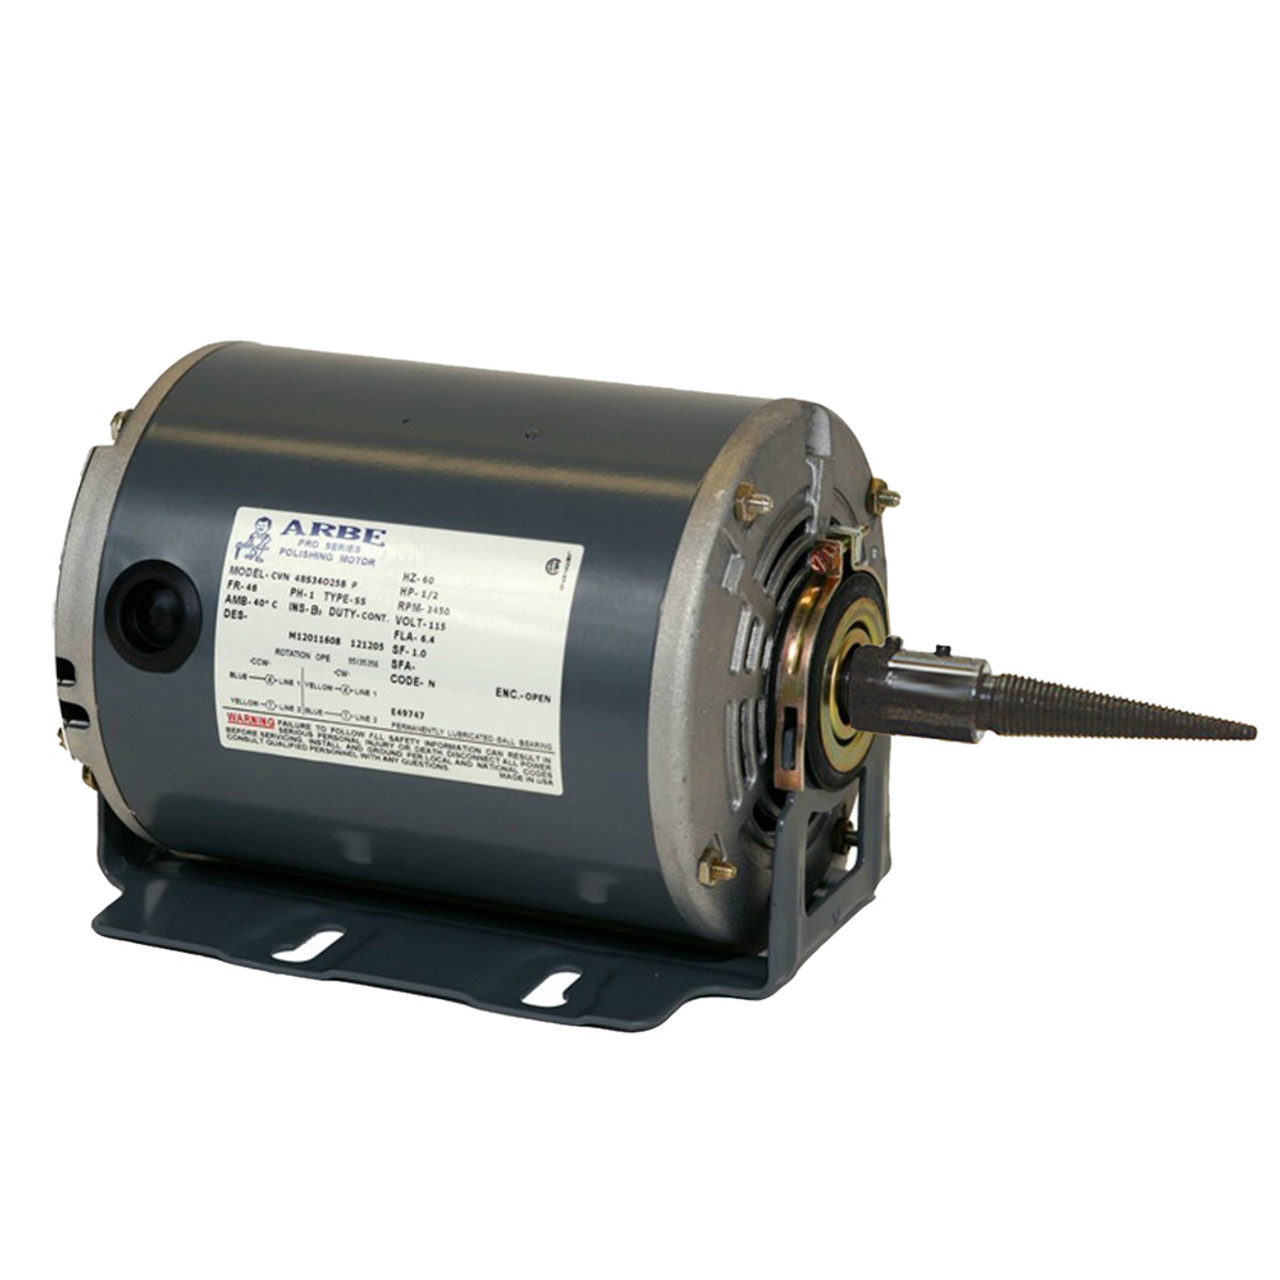 ARBE 1/2 HP (Unsealed) - Double Spindle Motor